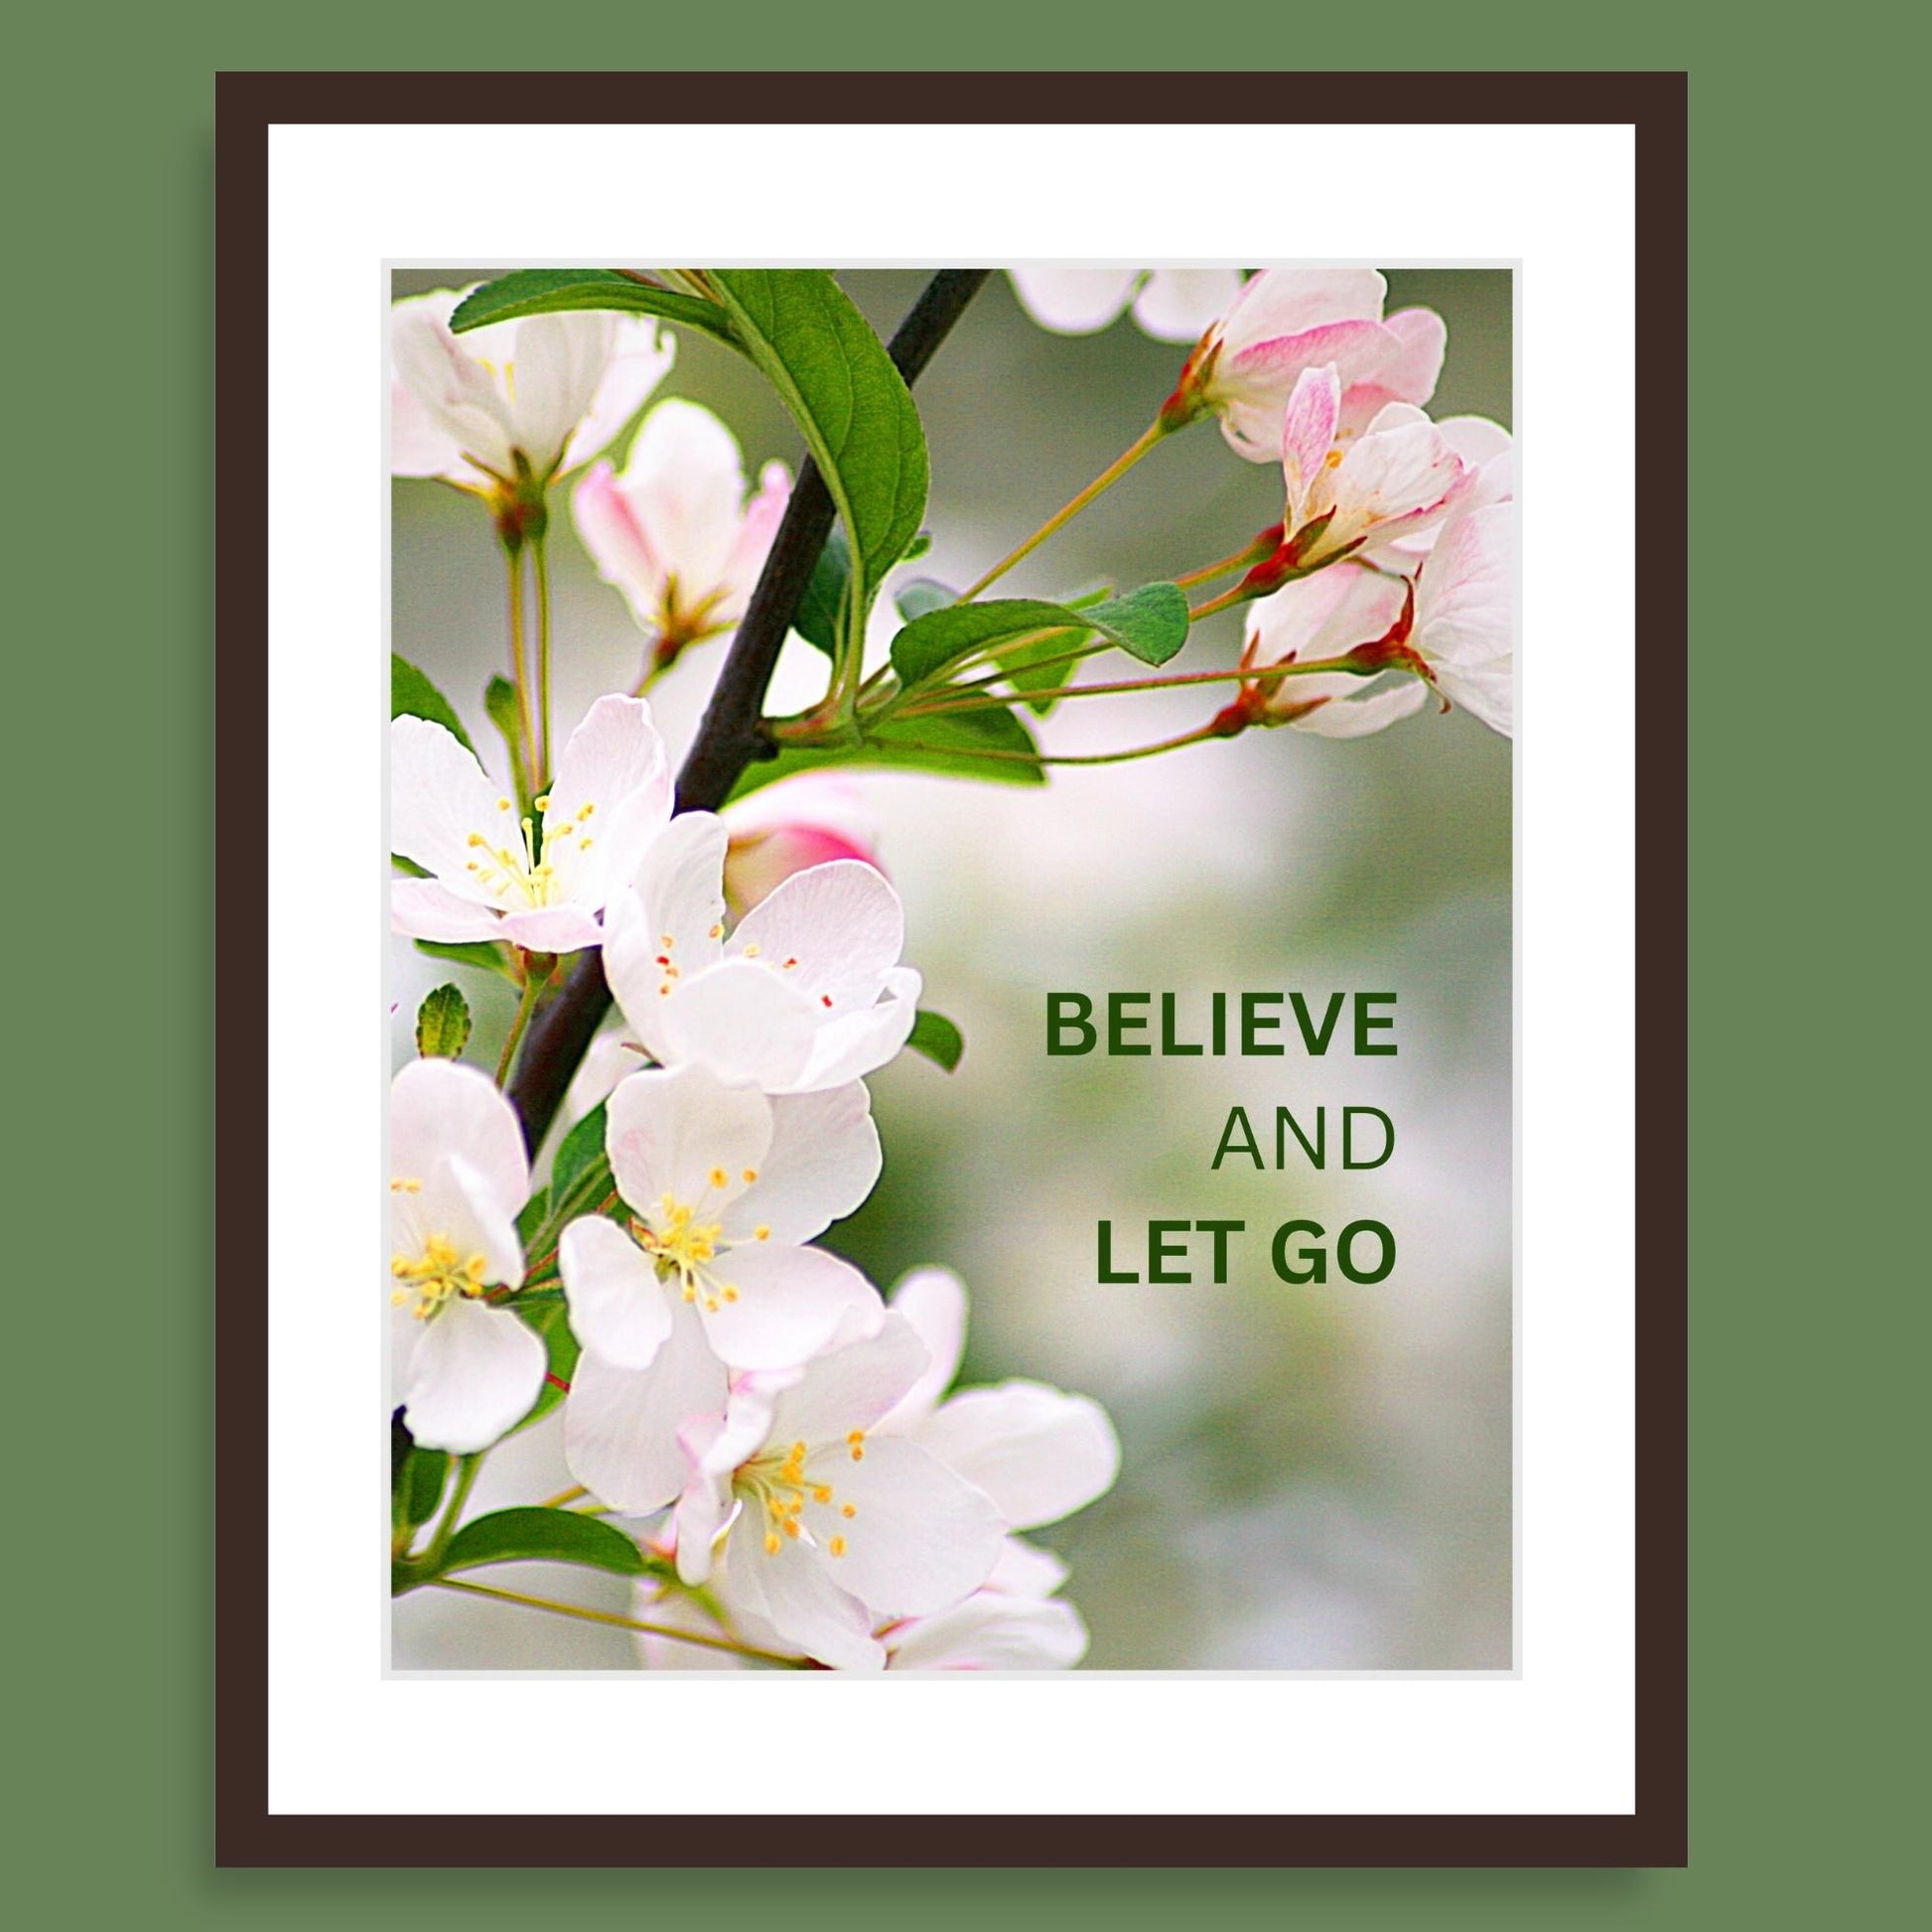 Inspirational Word Art - BELIEVE and LET GO - Pink and Green Floral Decor (8x10 print) | Floral Art print shown in dark brown frame on beautiful green wall | oak7west.com